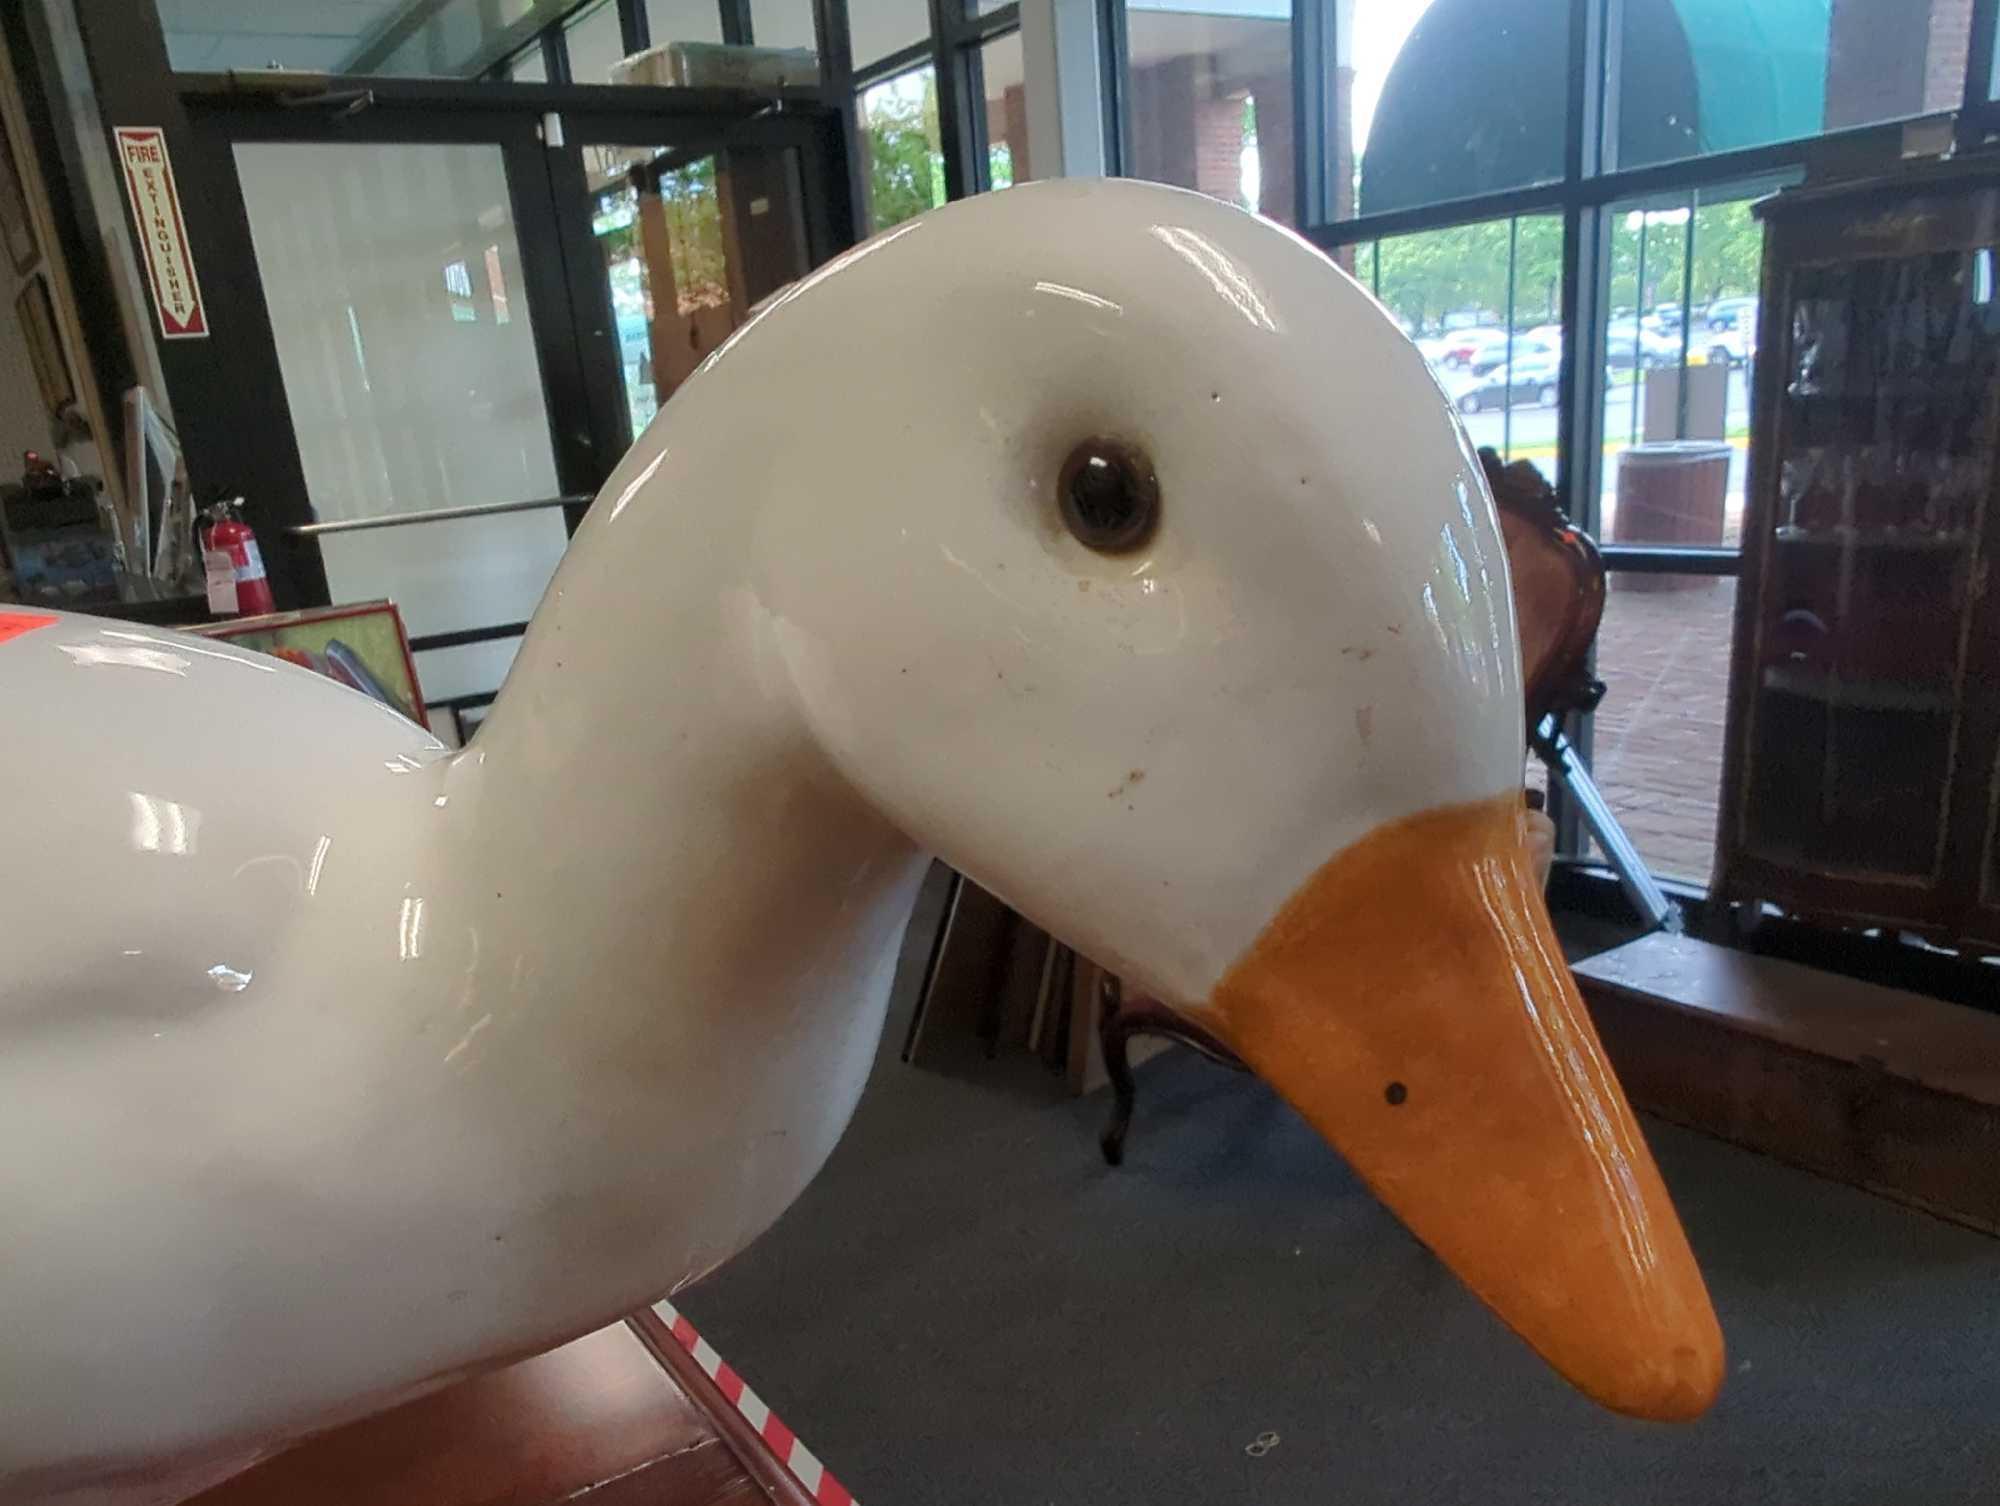 Segmia Tastesetter Large White Ceramic Goose Made in Italy, Is In Great Condition Retail Price Value